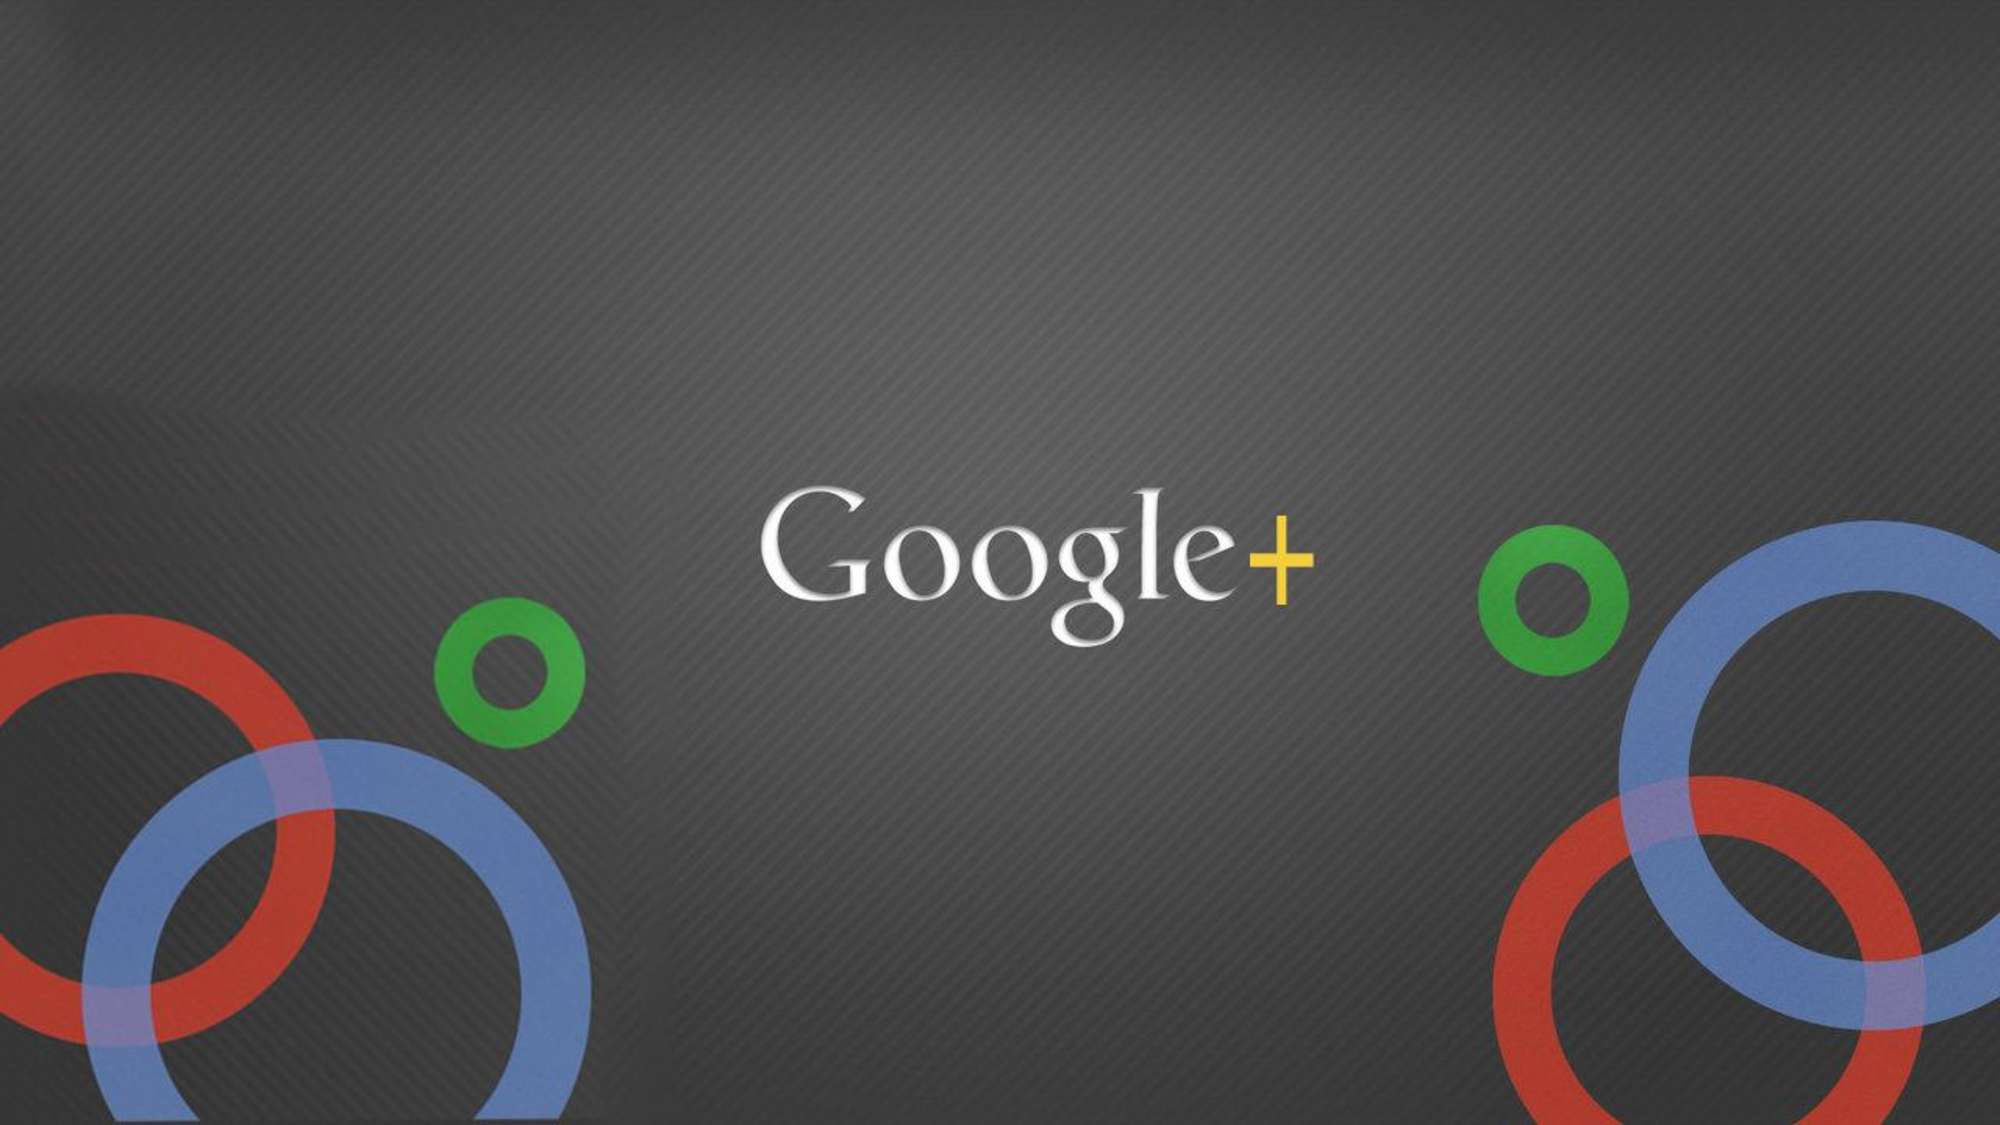 The Internet giant has redesigned Google+. Image Credit: Popular Science